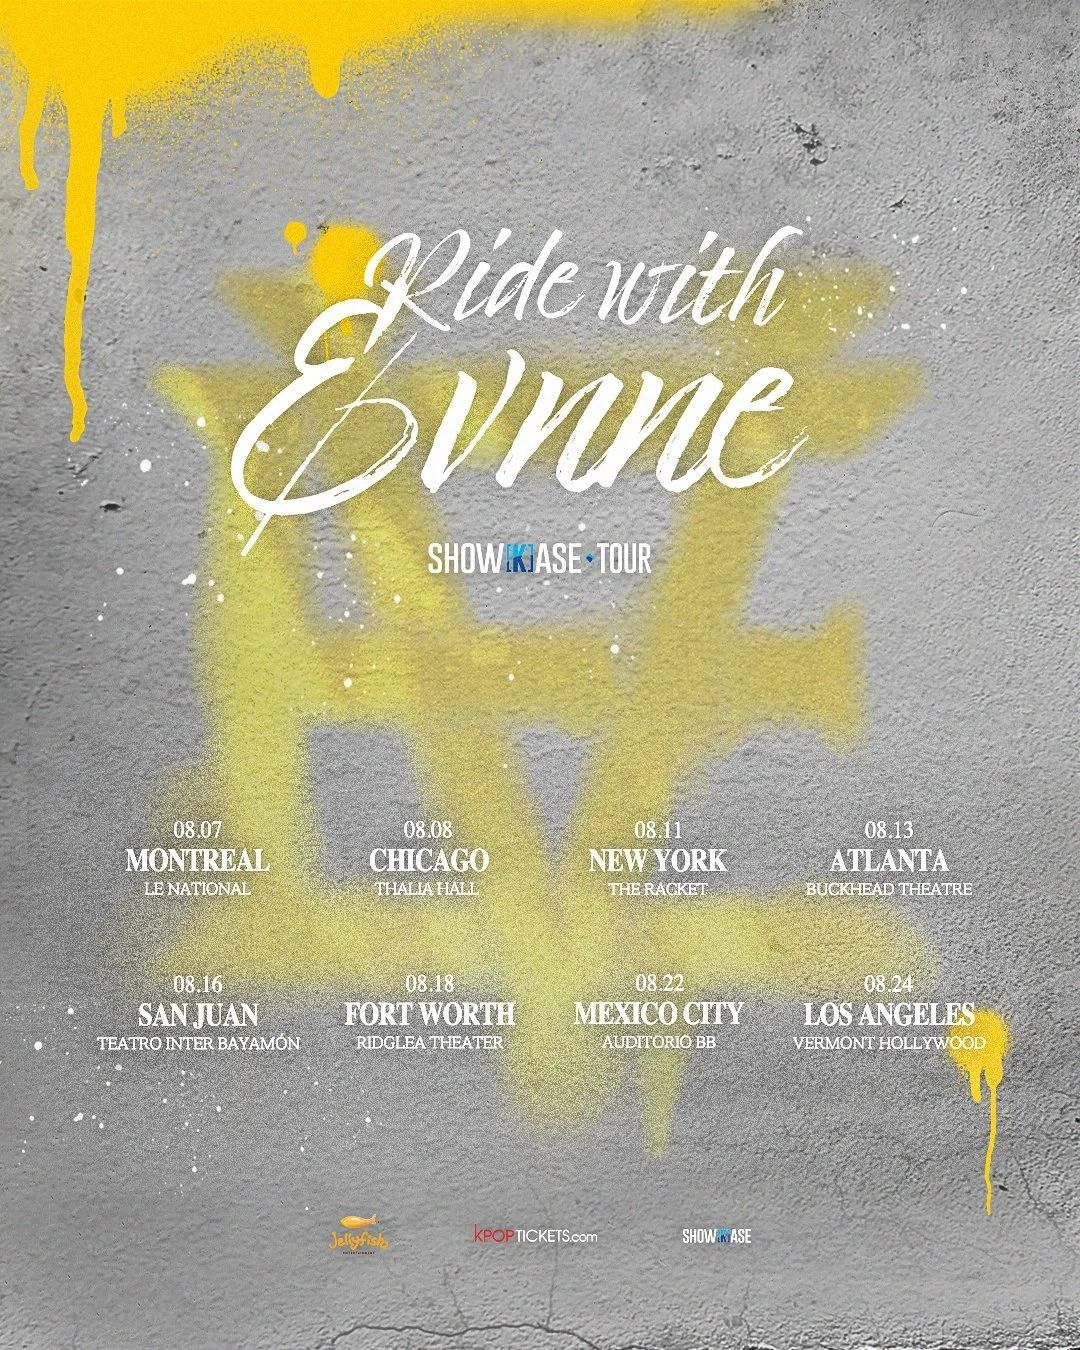 Ride with EVNNE world tour